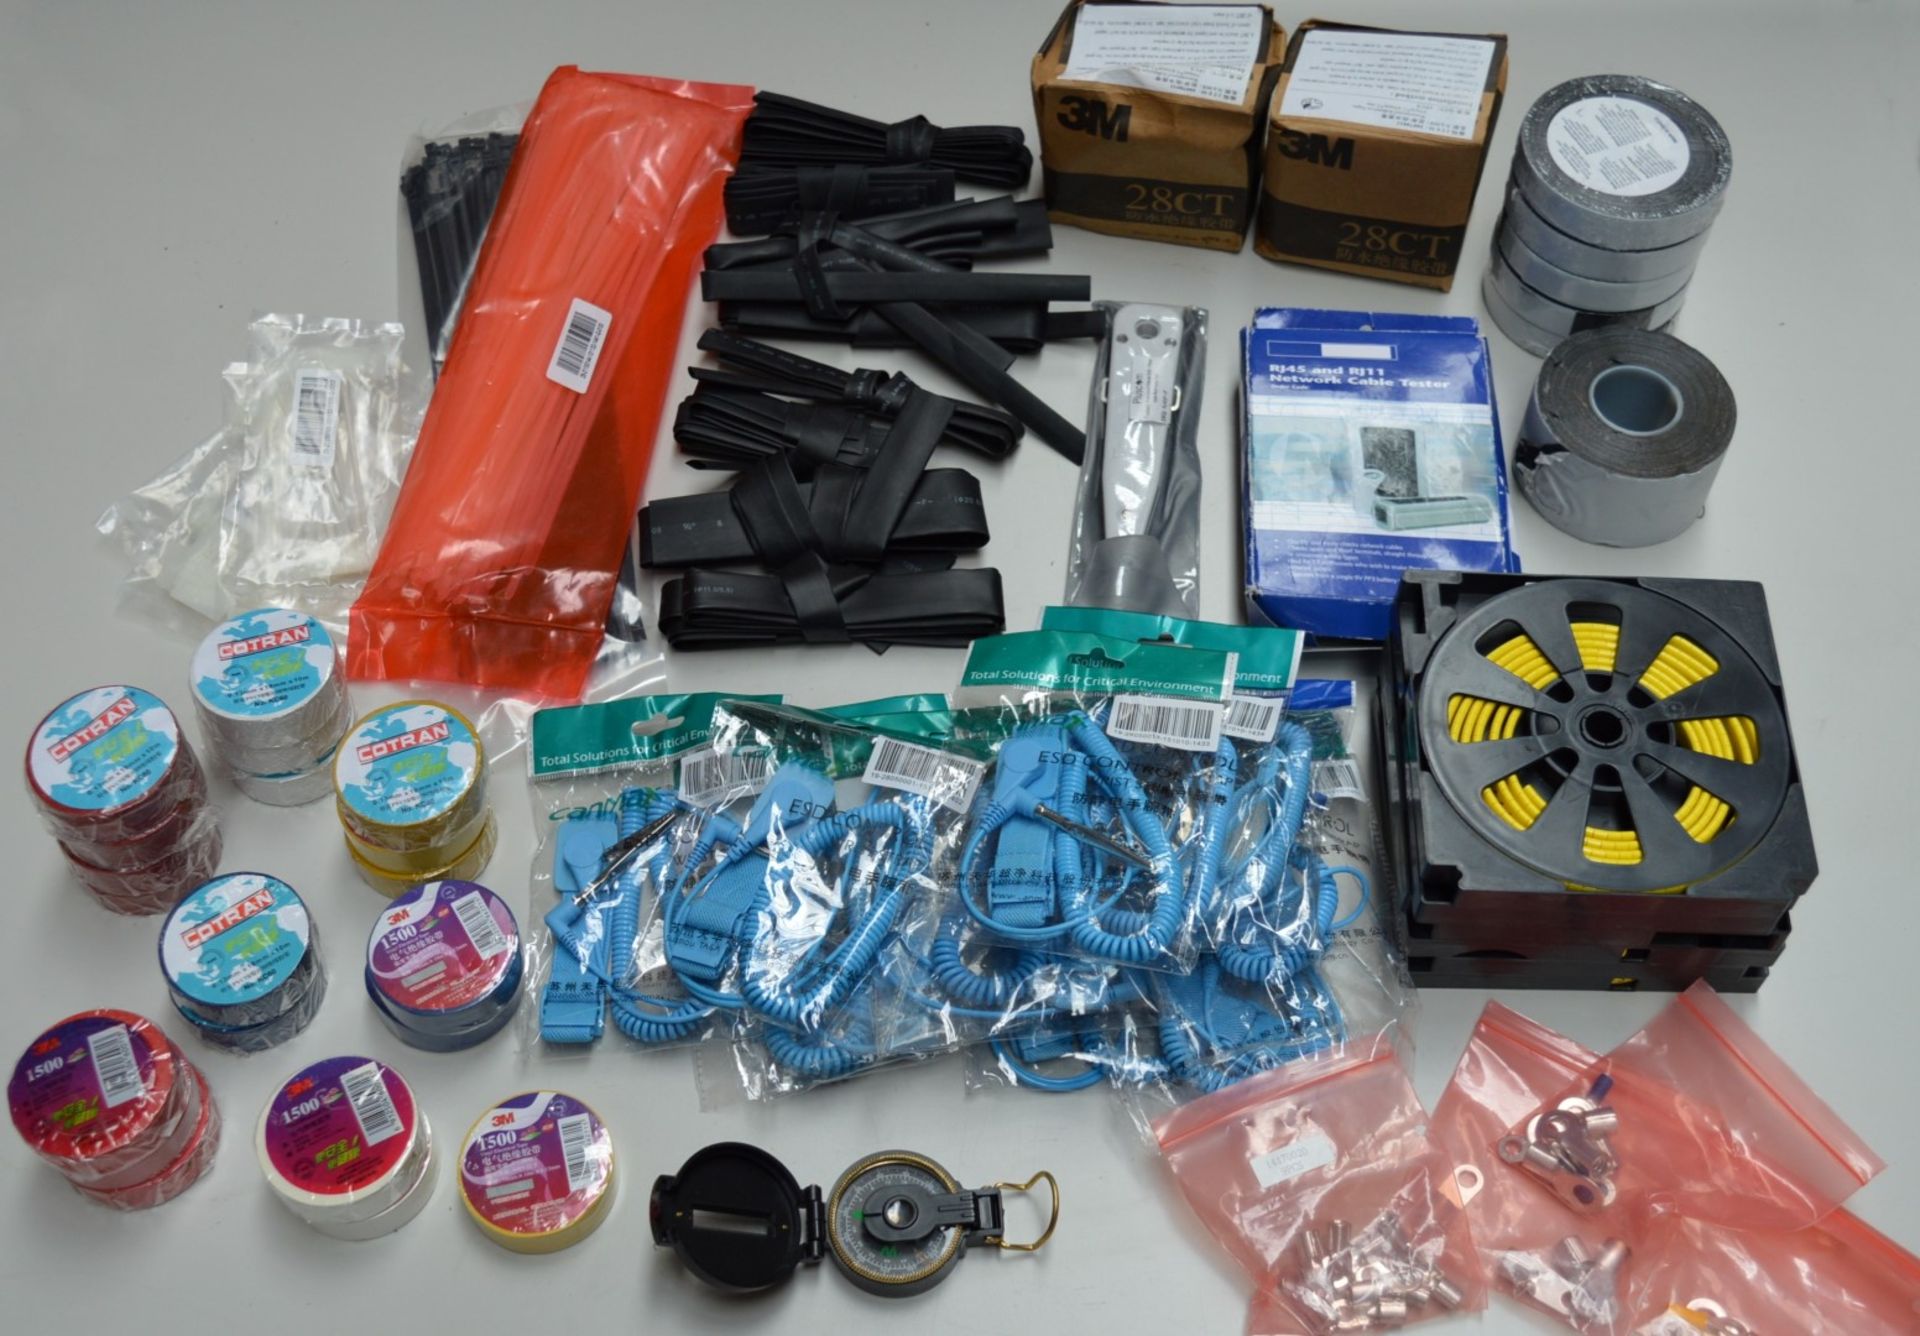 Assorted Collection of Electrical Consumables - CL300 - Includes 20 x Rolls of PVC Electrical Tape, - Image 28 of 28